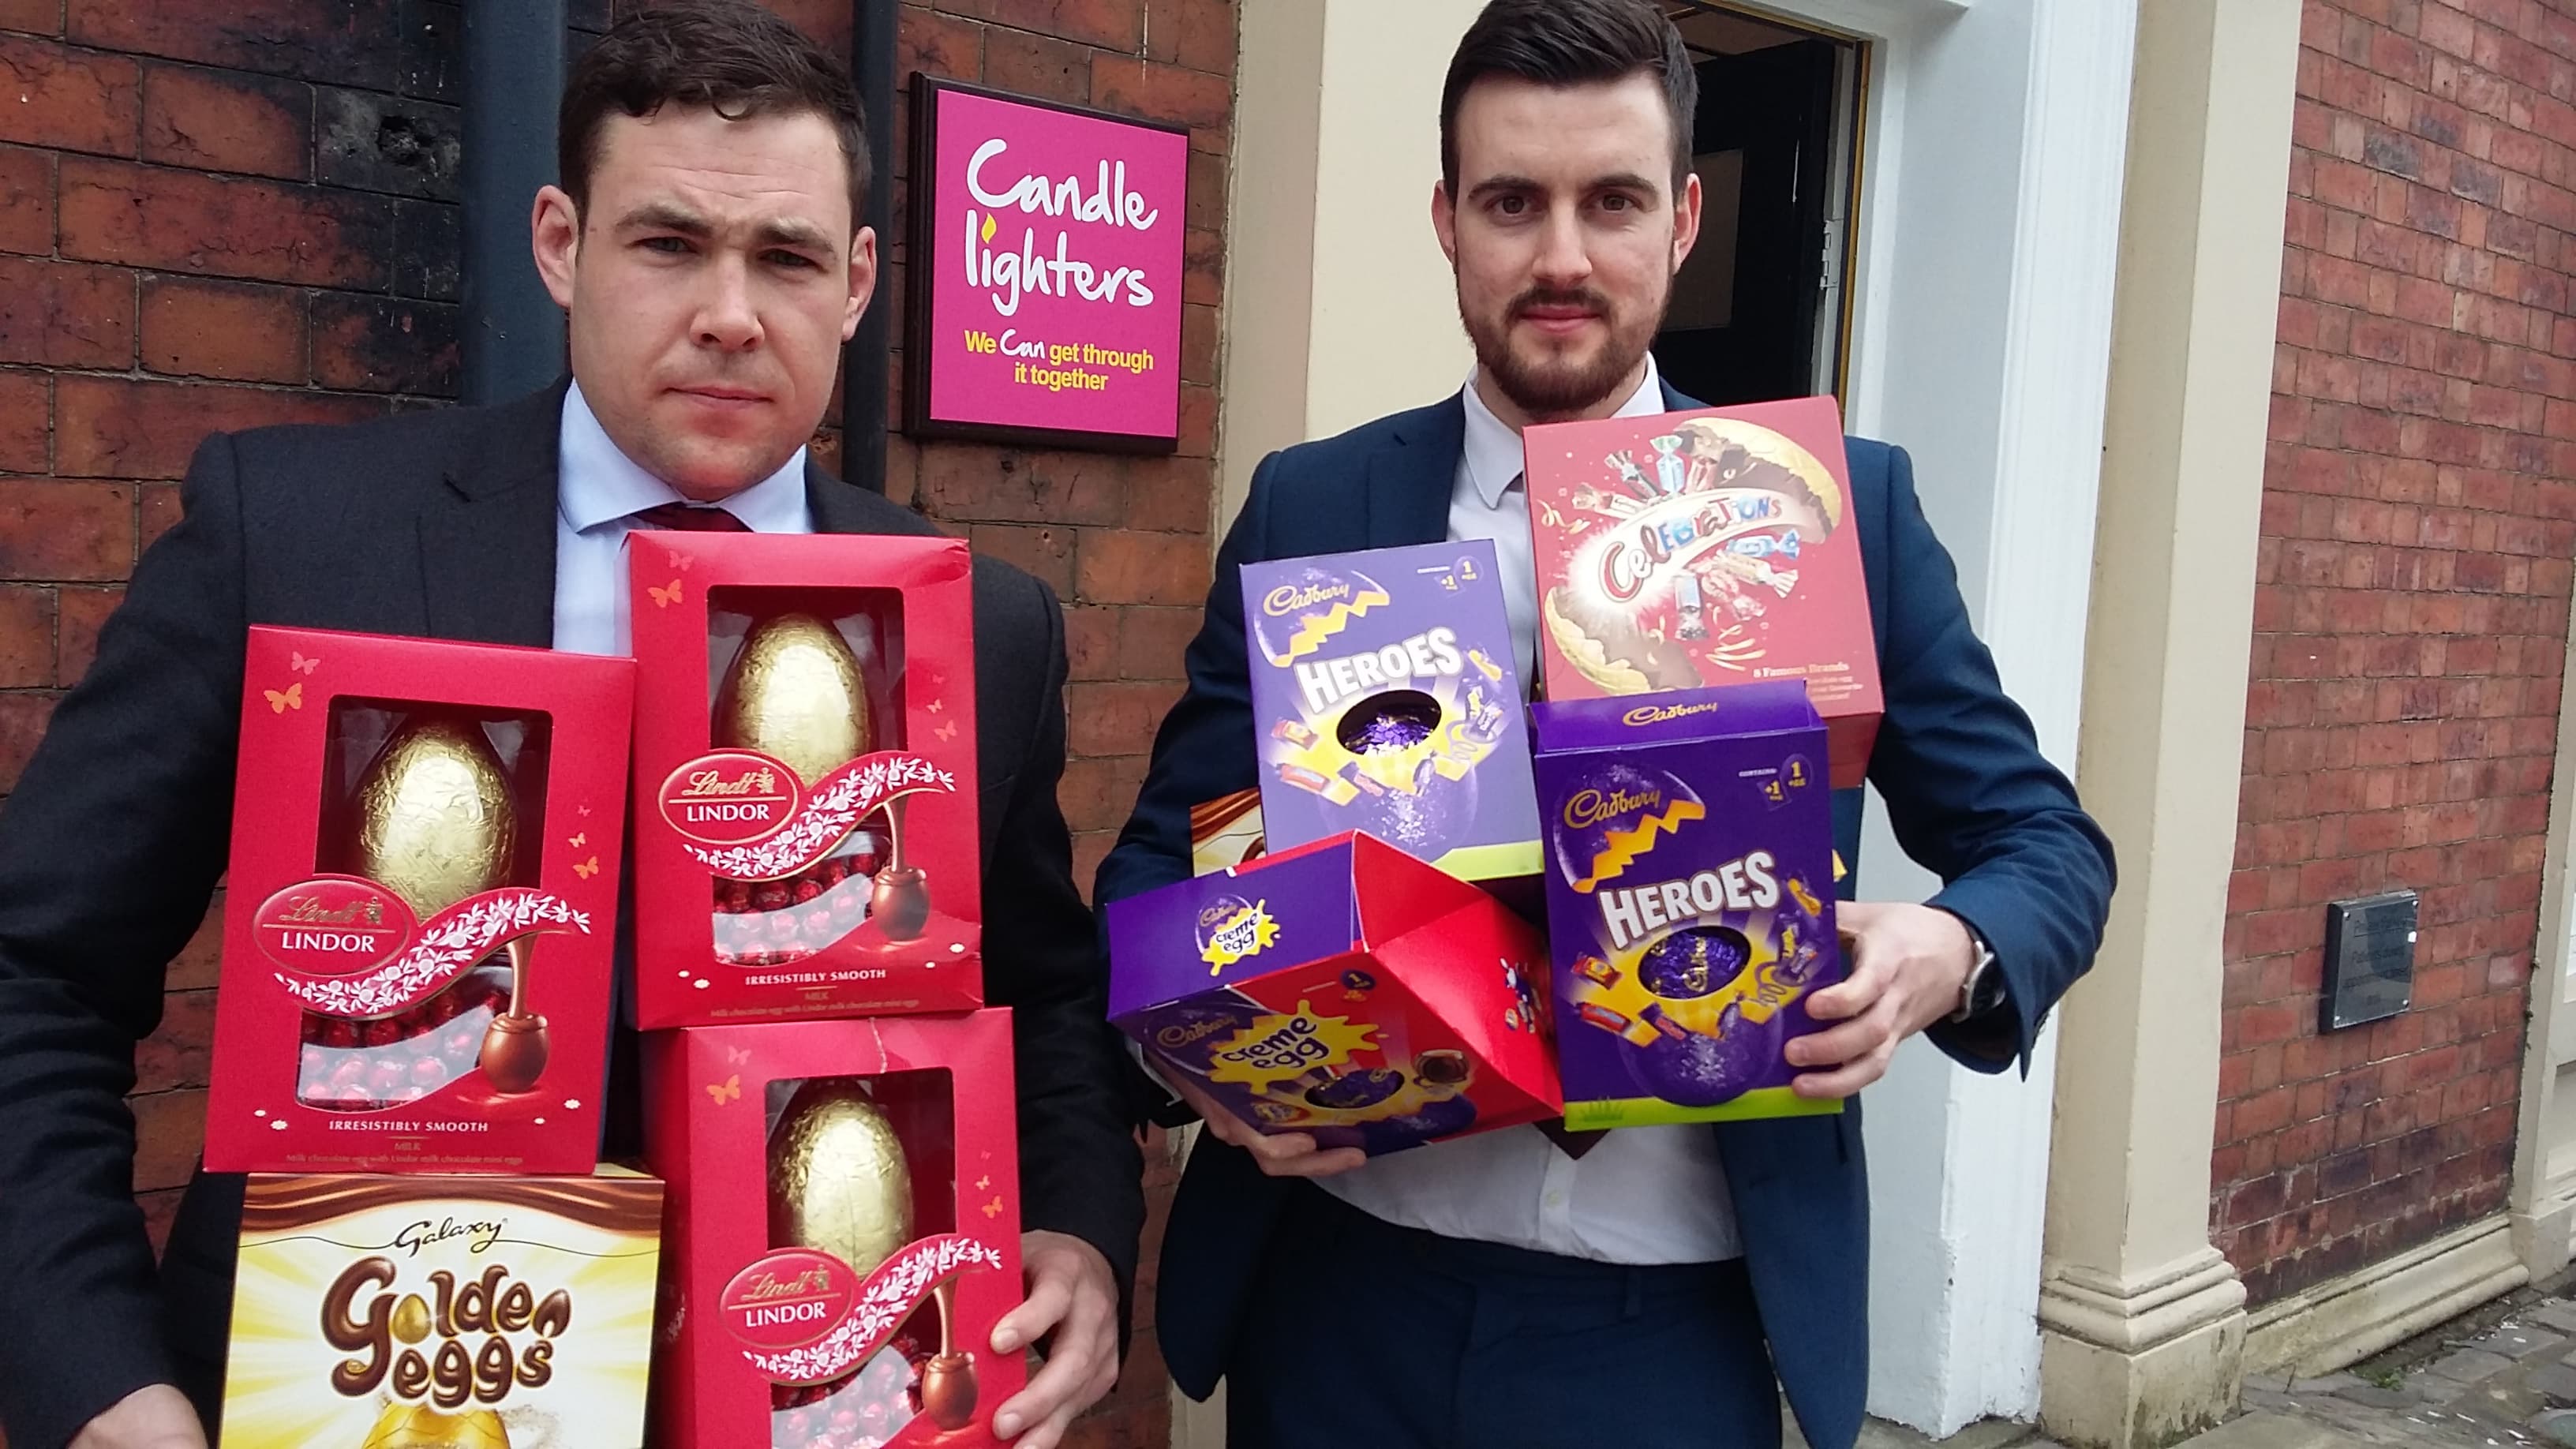 King Chambers’ Charity Easter Egg Campaign for Candlelighters and Wood Street Mission